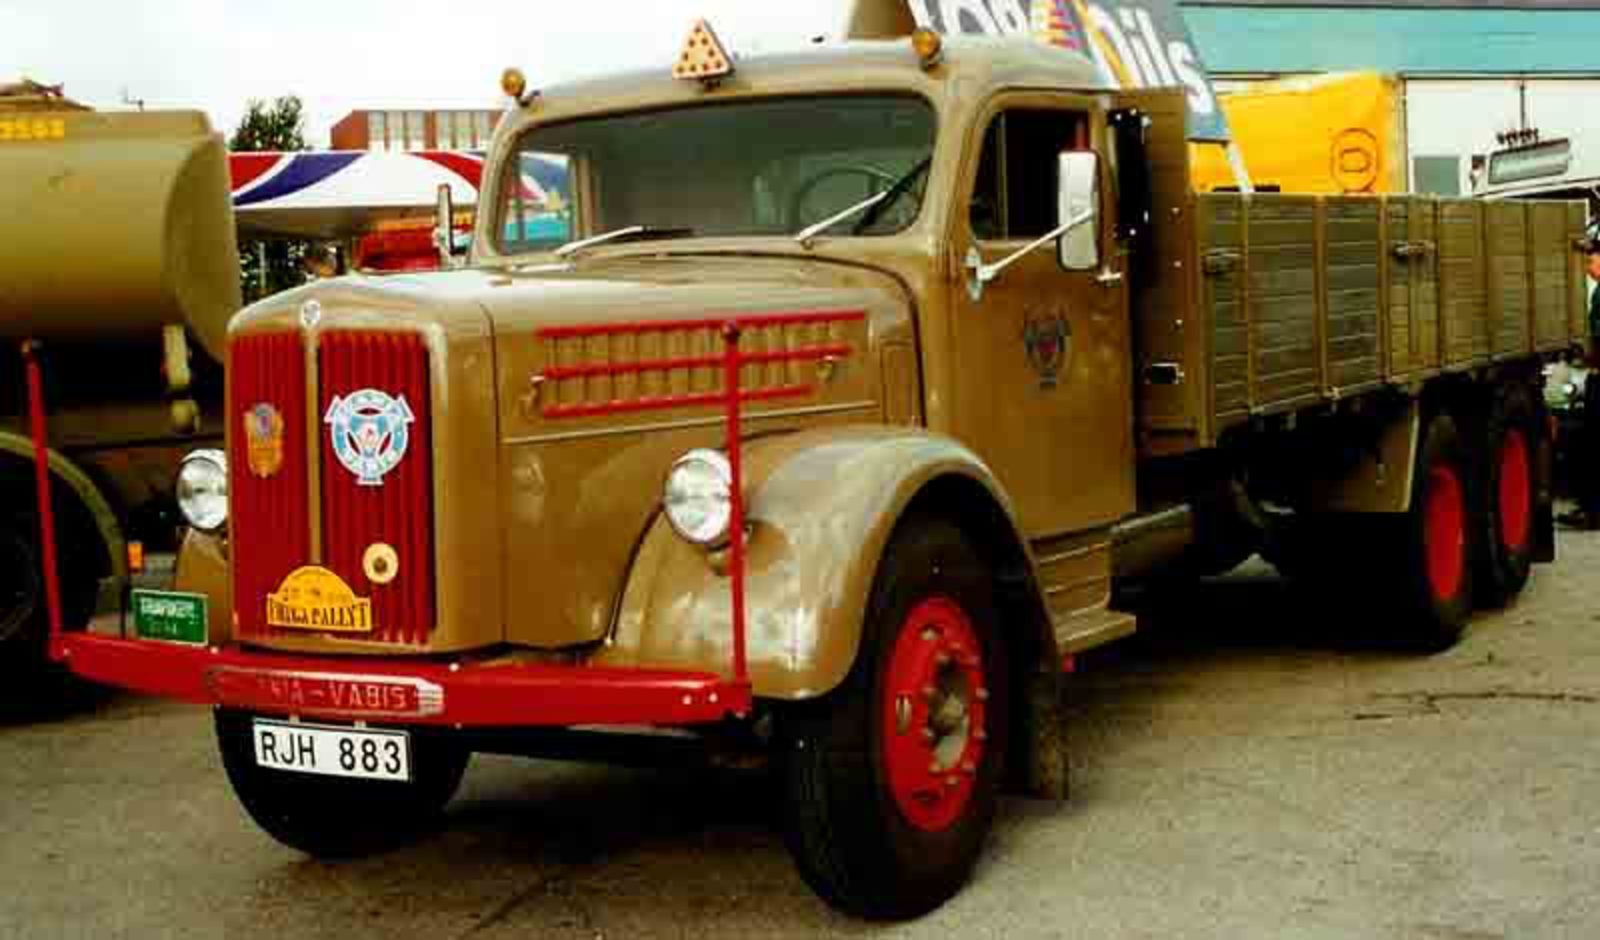 Dossier: Camion Scania-Vabis LS64 1950.jpg - Wikimedia Commons